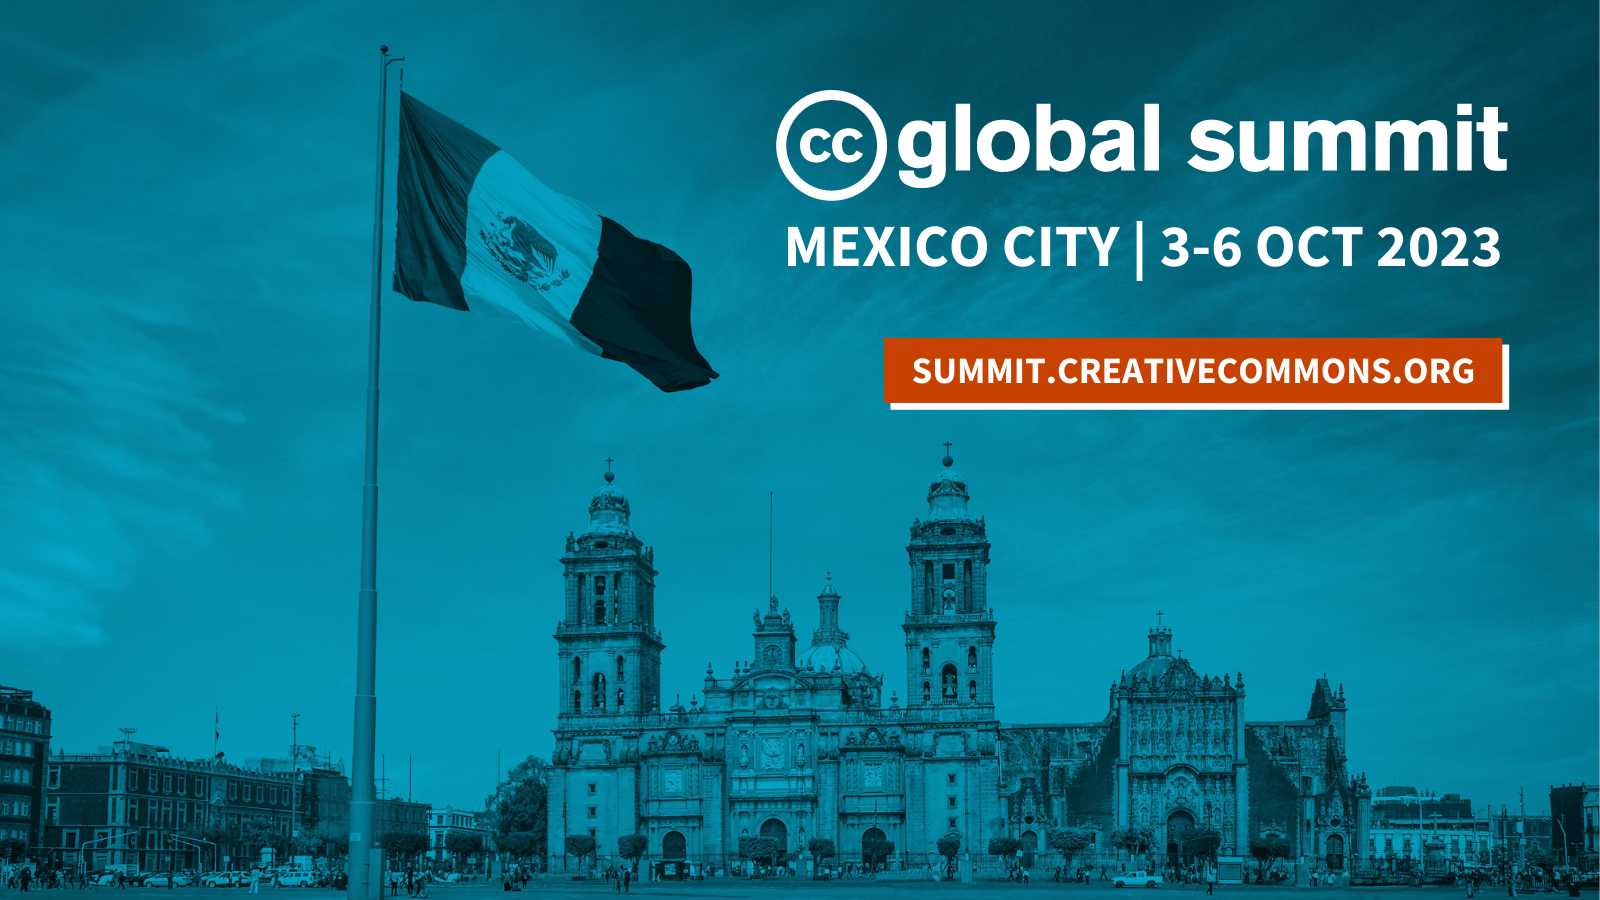 Volunteer to Help Shape CC’s Global Summit in Mexico City Creative